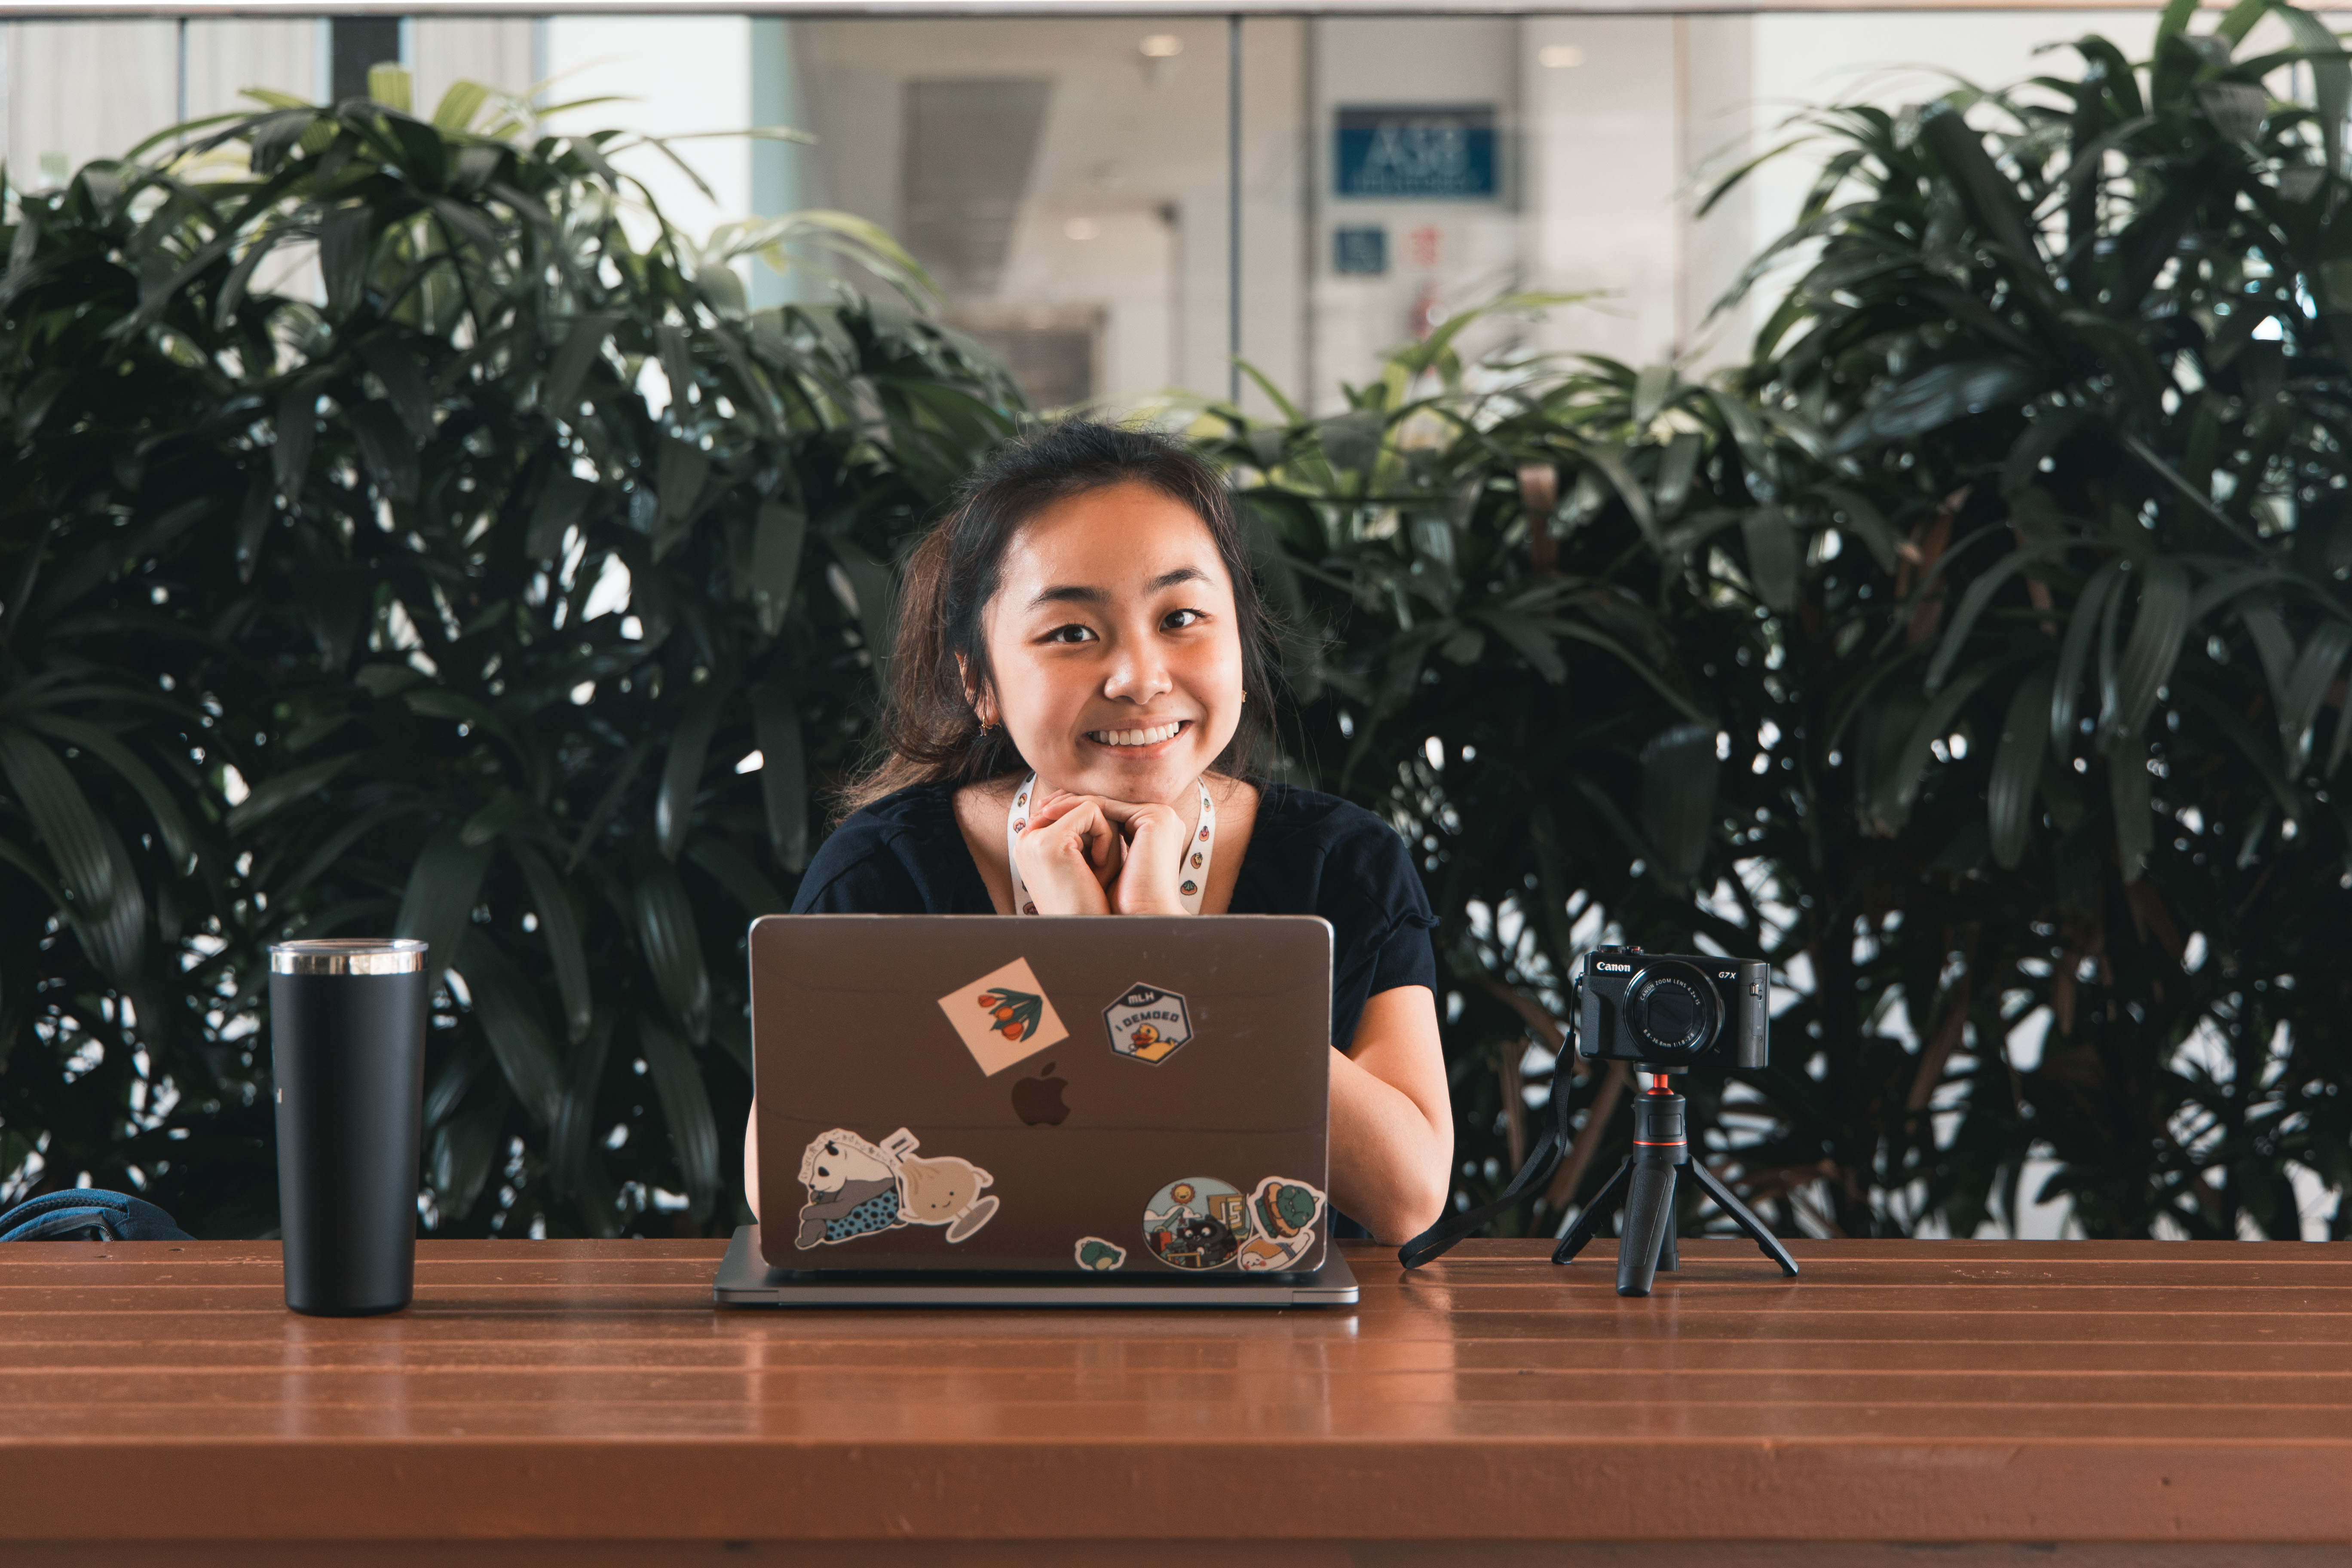 Amelia Leow is a third-year Computer Science student from the National University of Singapore currently interning as a Product Analyst at PayPal Singapore, and a recipient of the WLP